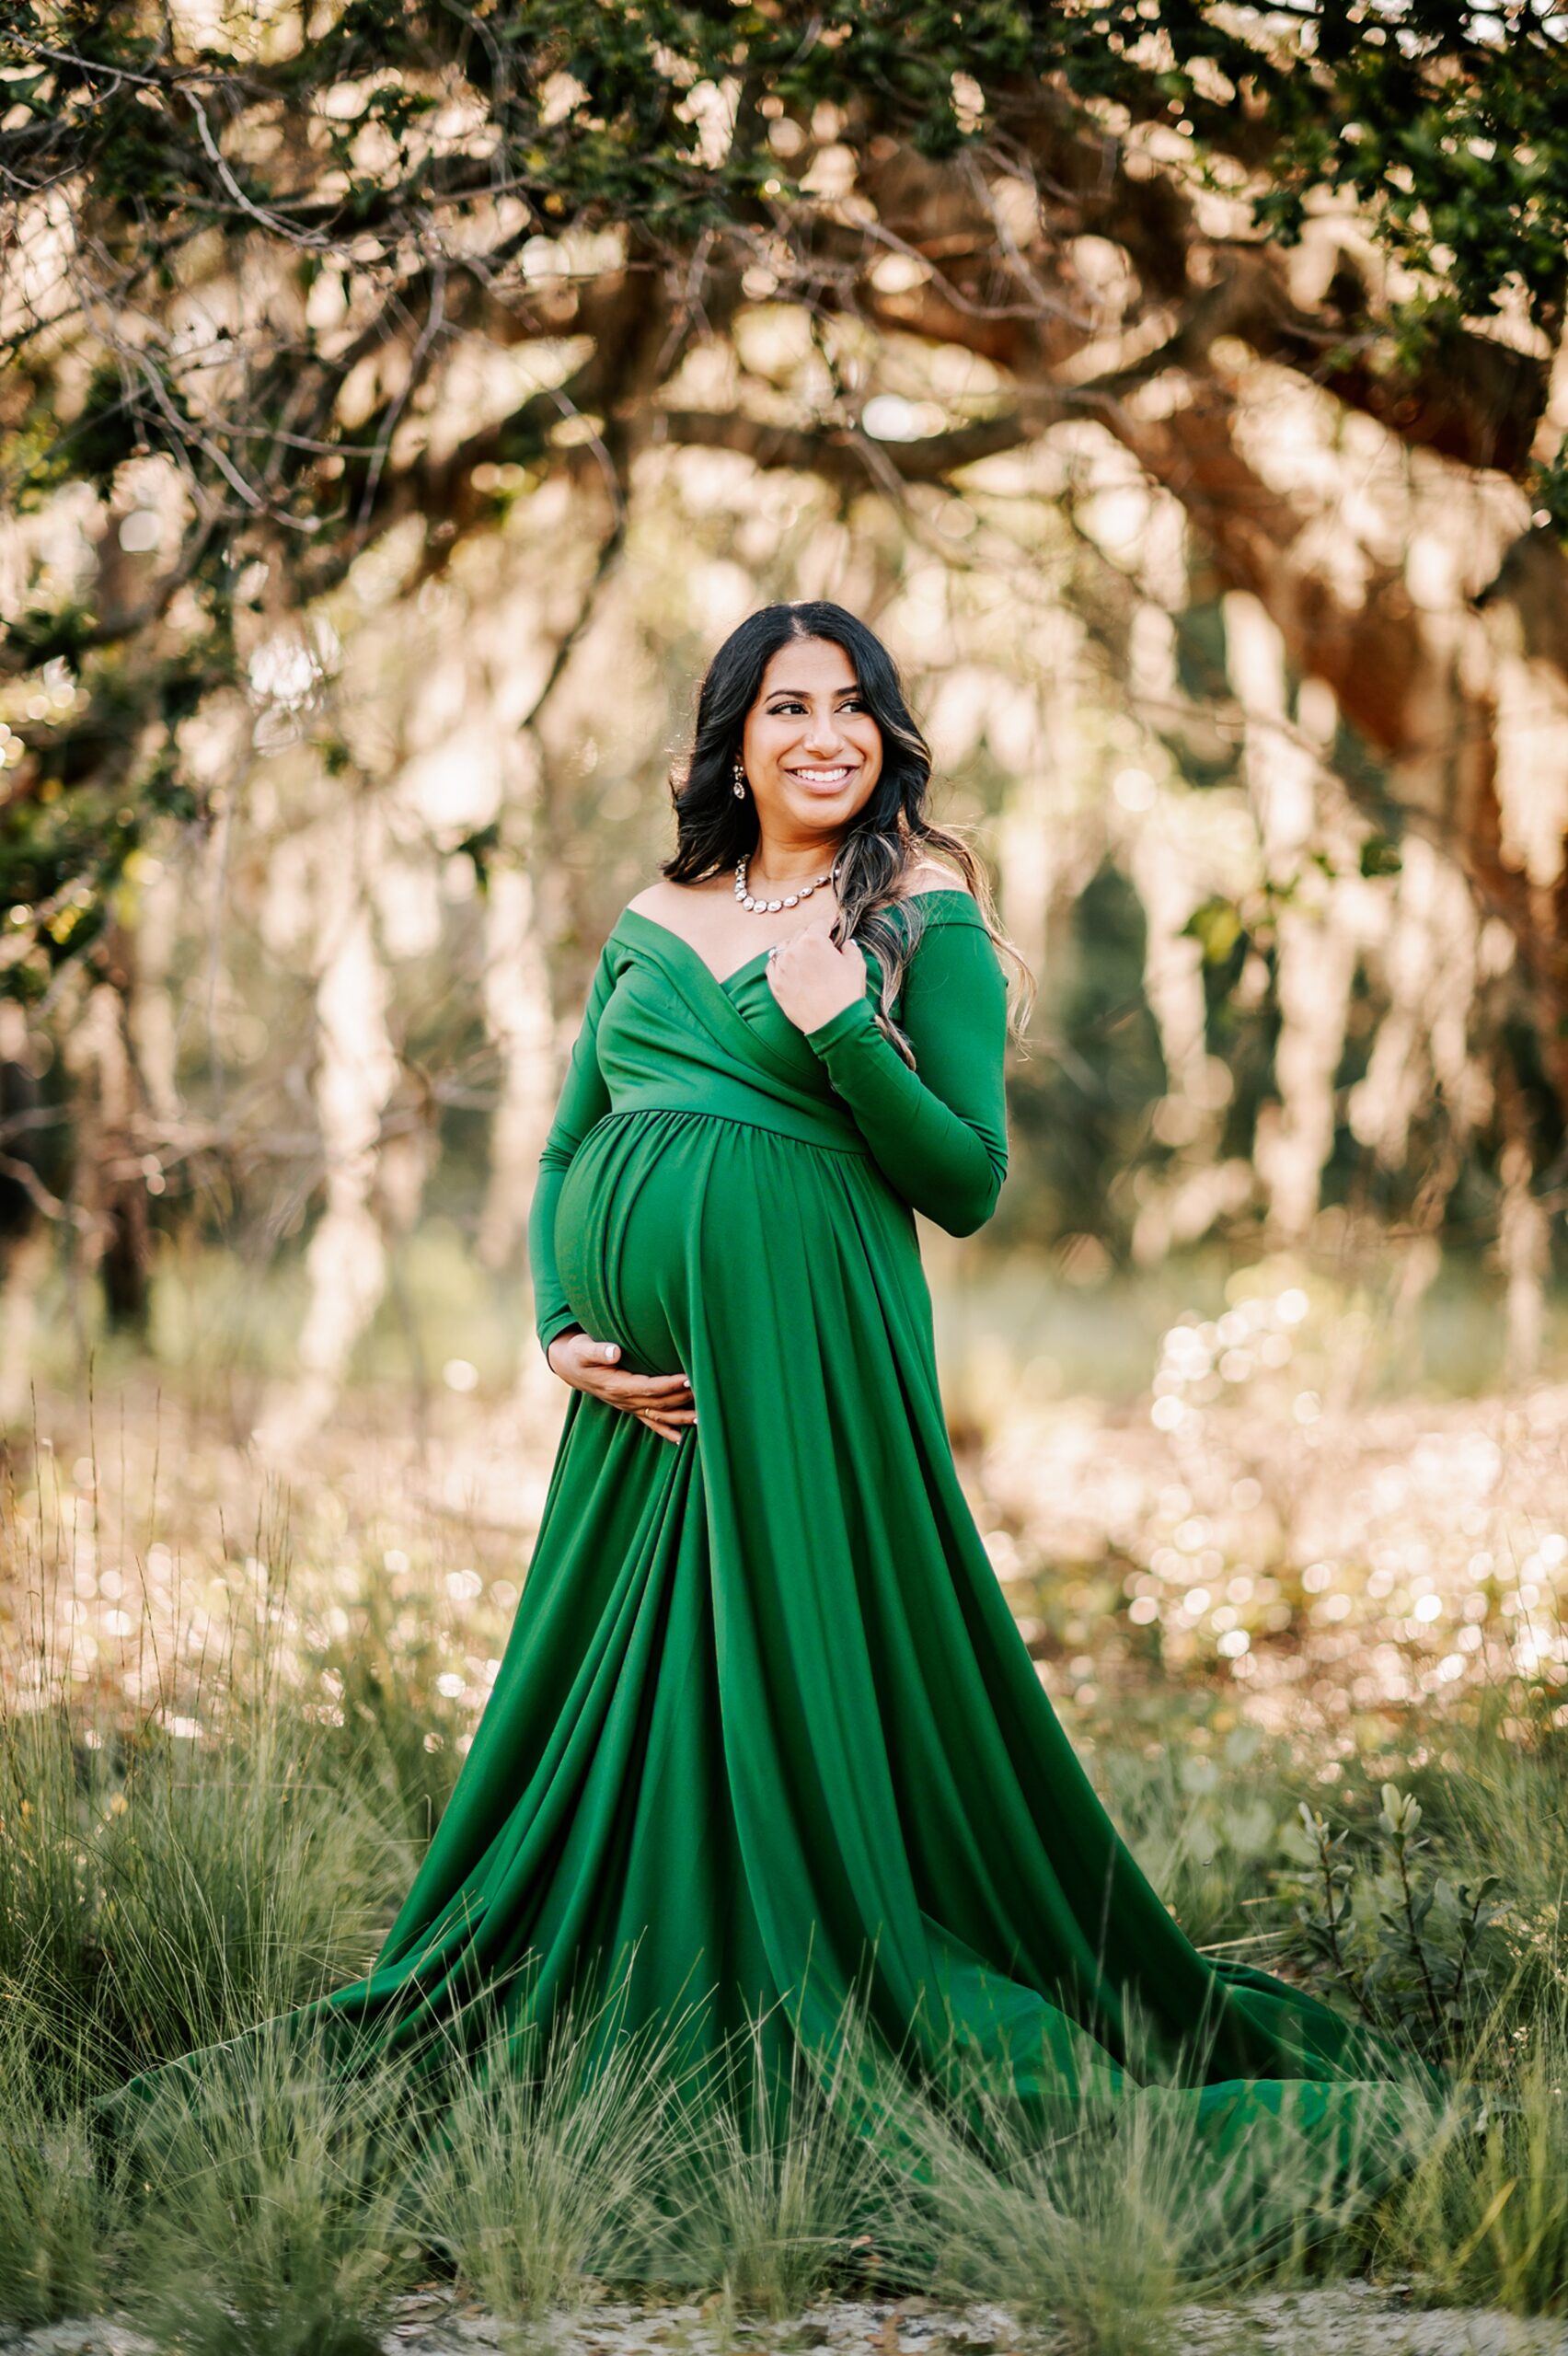 A mother to be wearing a long green maternity gown stands in a forest at sunset